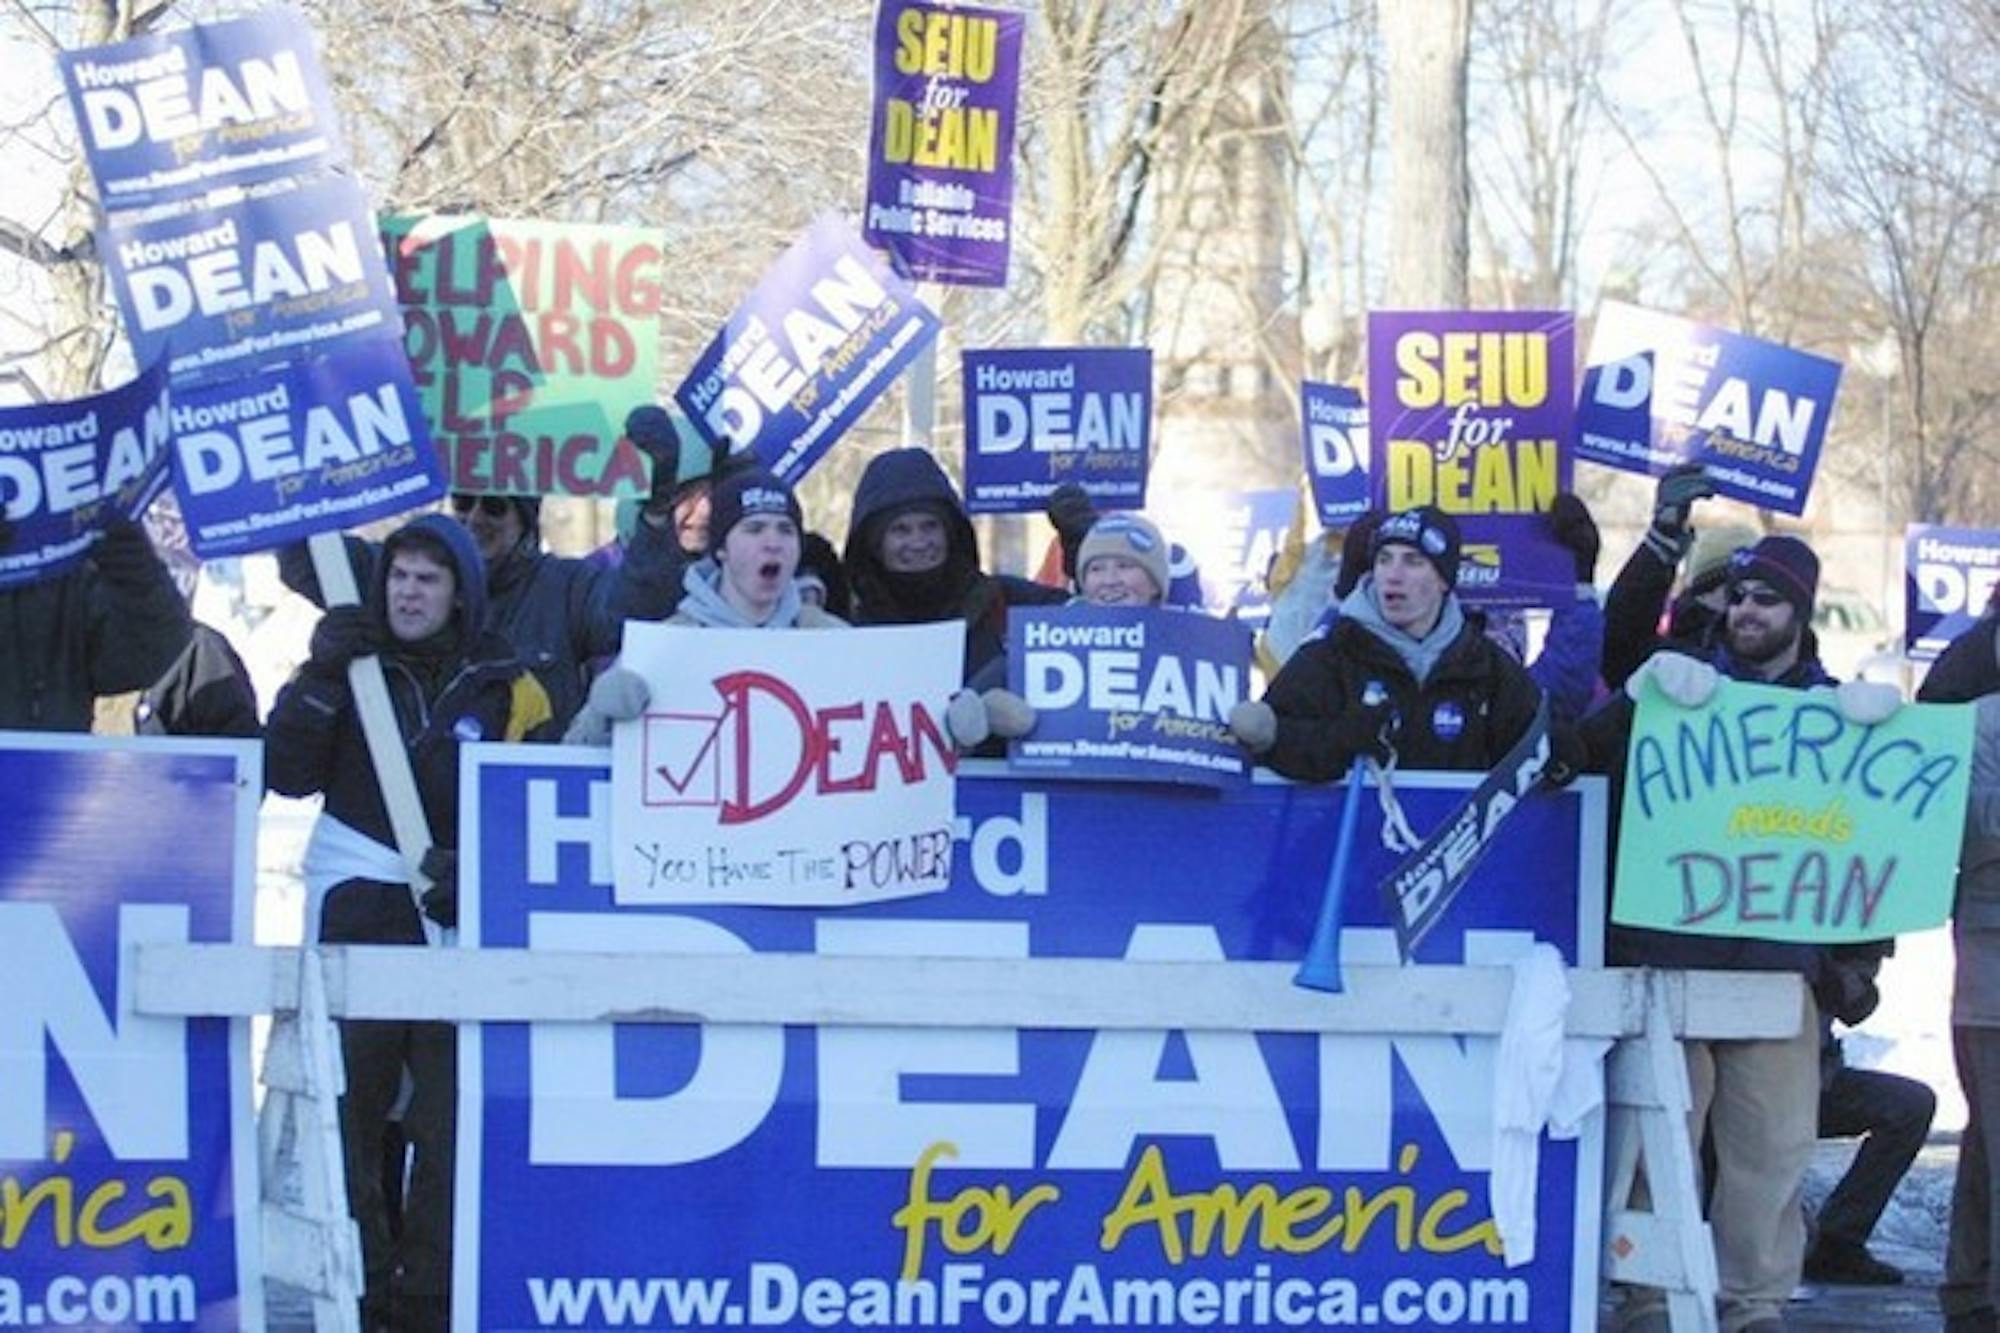 Dartmouth students support Howard Dean during his candidacy for the Democratic nomination for president during Winter term of 2004.